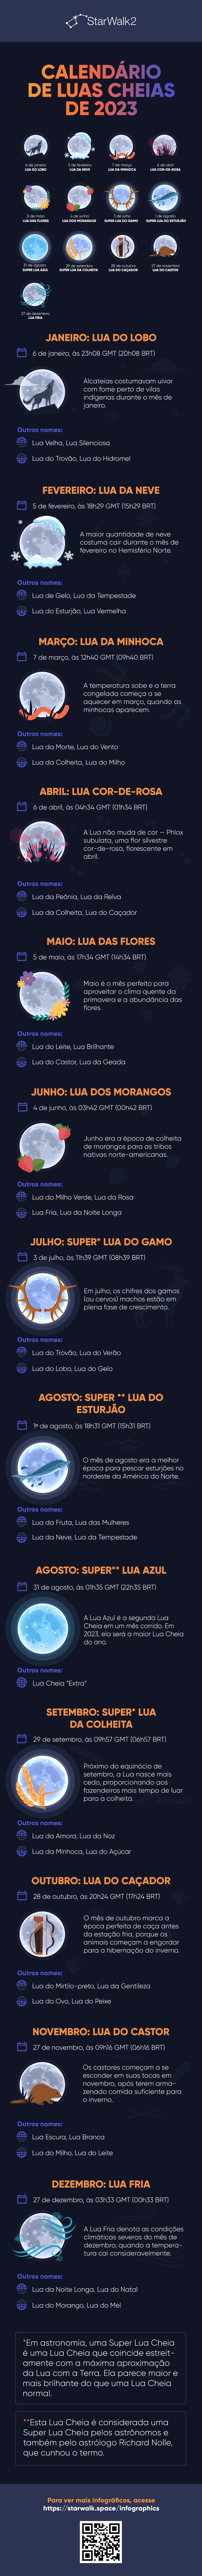 Full Moons 2023 Infographic 2